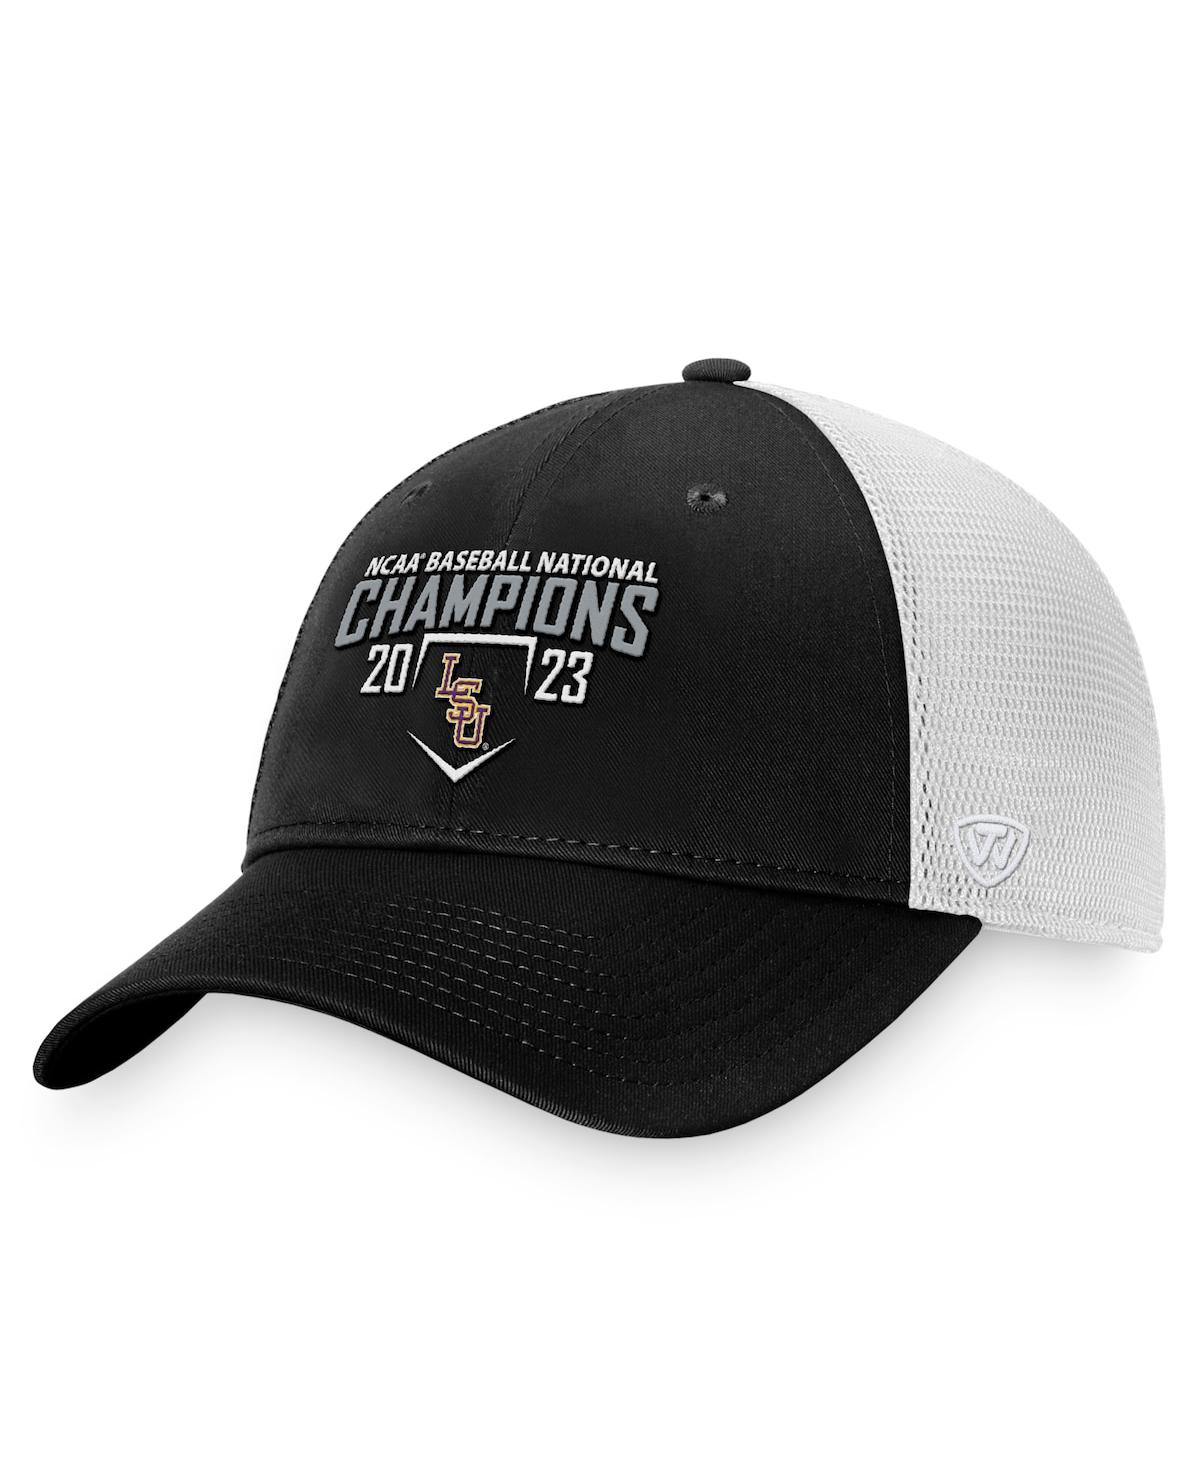 Men's and Women's Top of the World Black, White Lsu Tigers 2023 Ncaa Men's Baseball College World Series Champions Trucker Adjustable Hat - Black, Whi